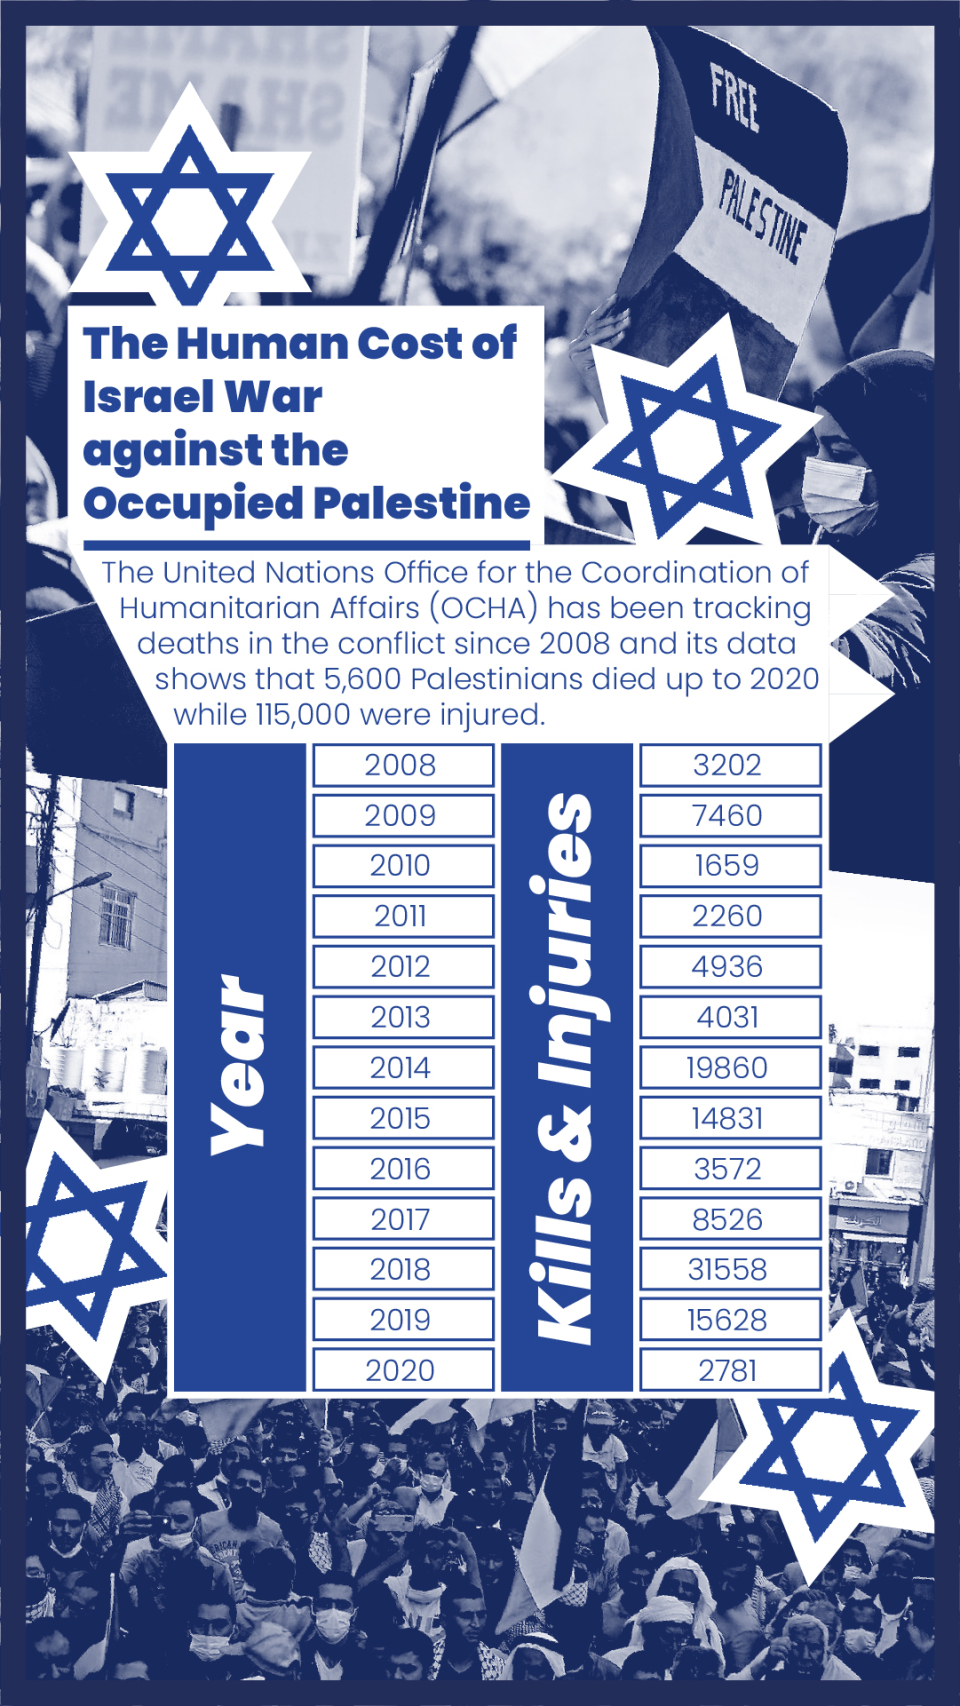 The Human Cost of Israel War against the Occupied Palestine